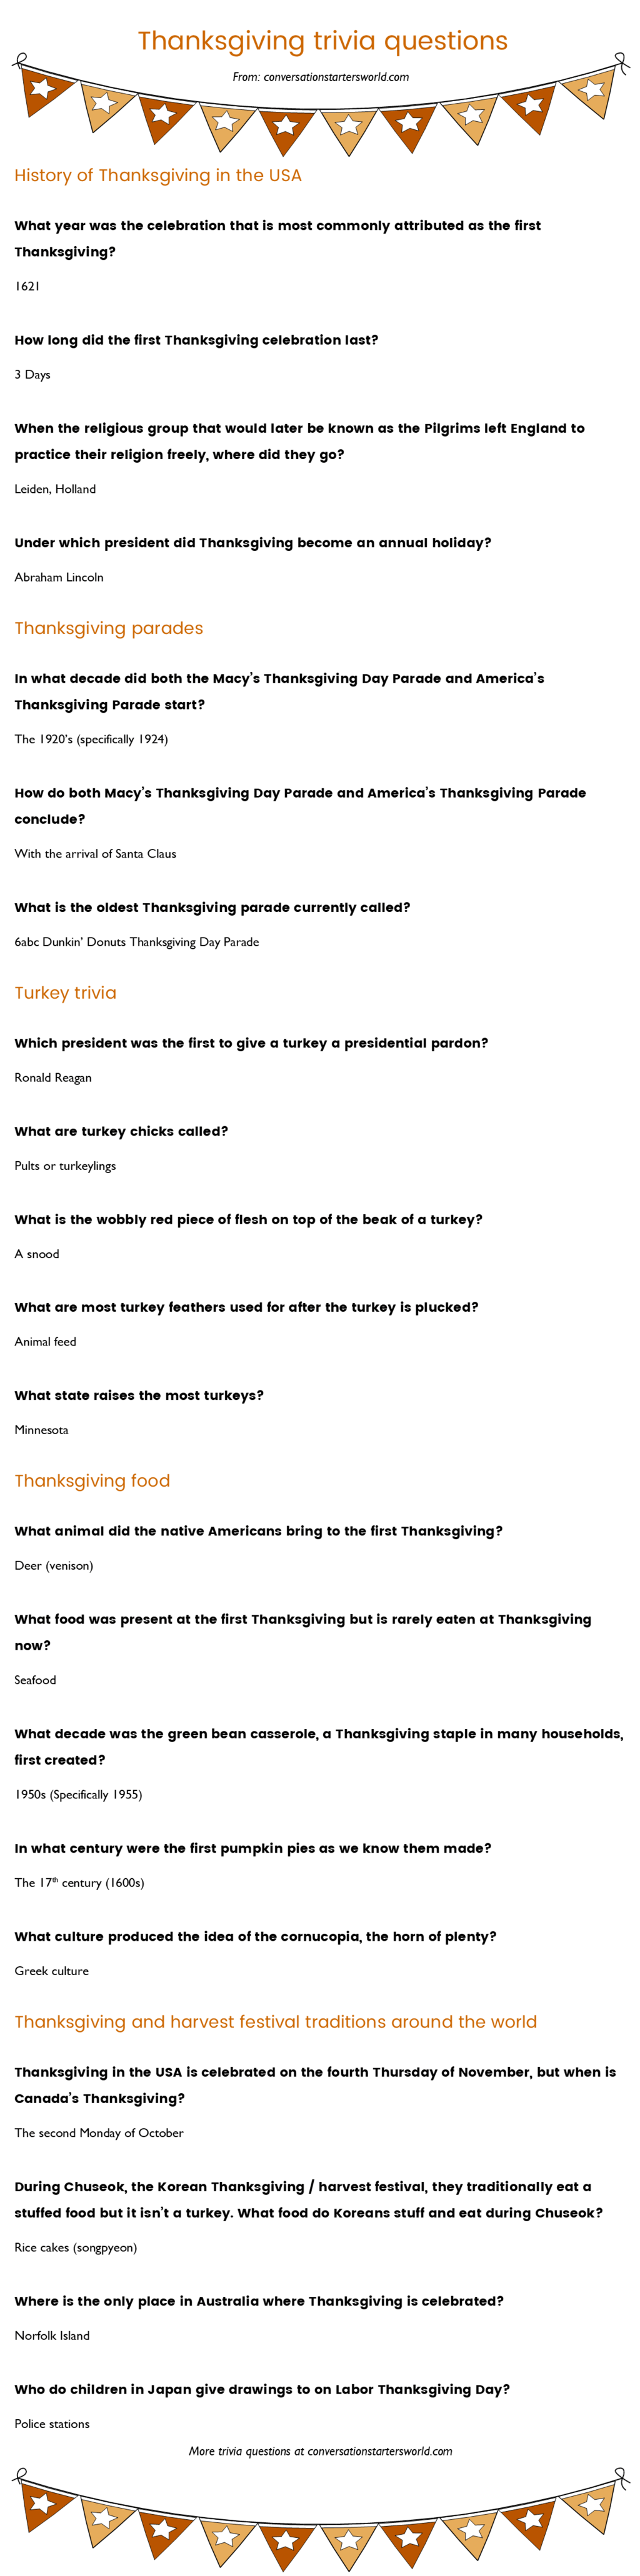 Thanksgiving Trivia Questions And Answers Image Thanksgiving Facts